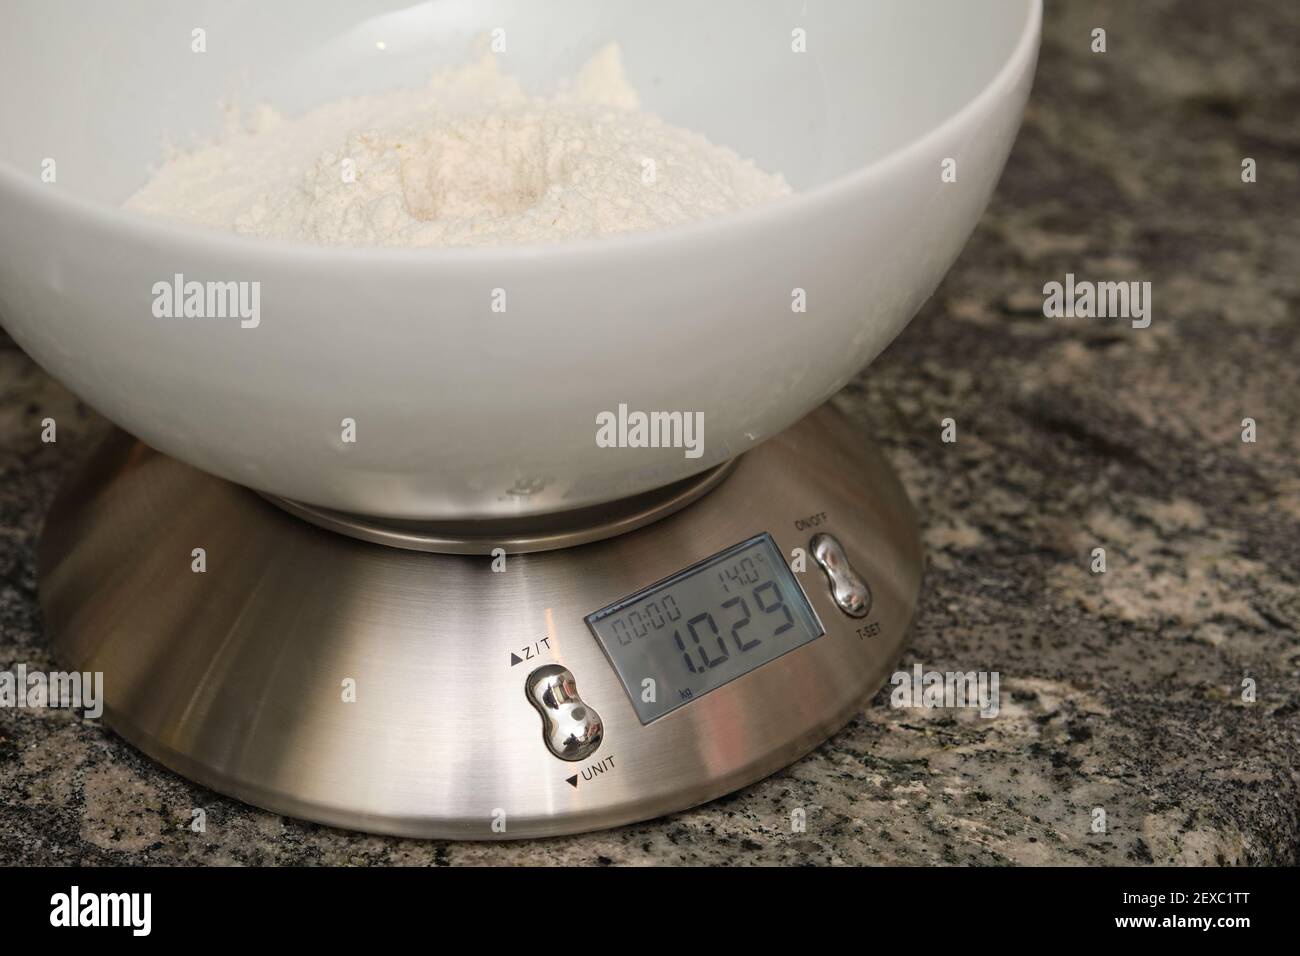 https://c8.alamy.com/comp/2EXC1TT/weighing-flour-for-baking-on-a-digital-scale-preparing-bread-at-home-2EXC1TT.jpg